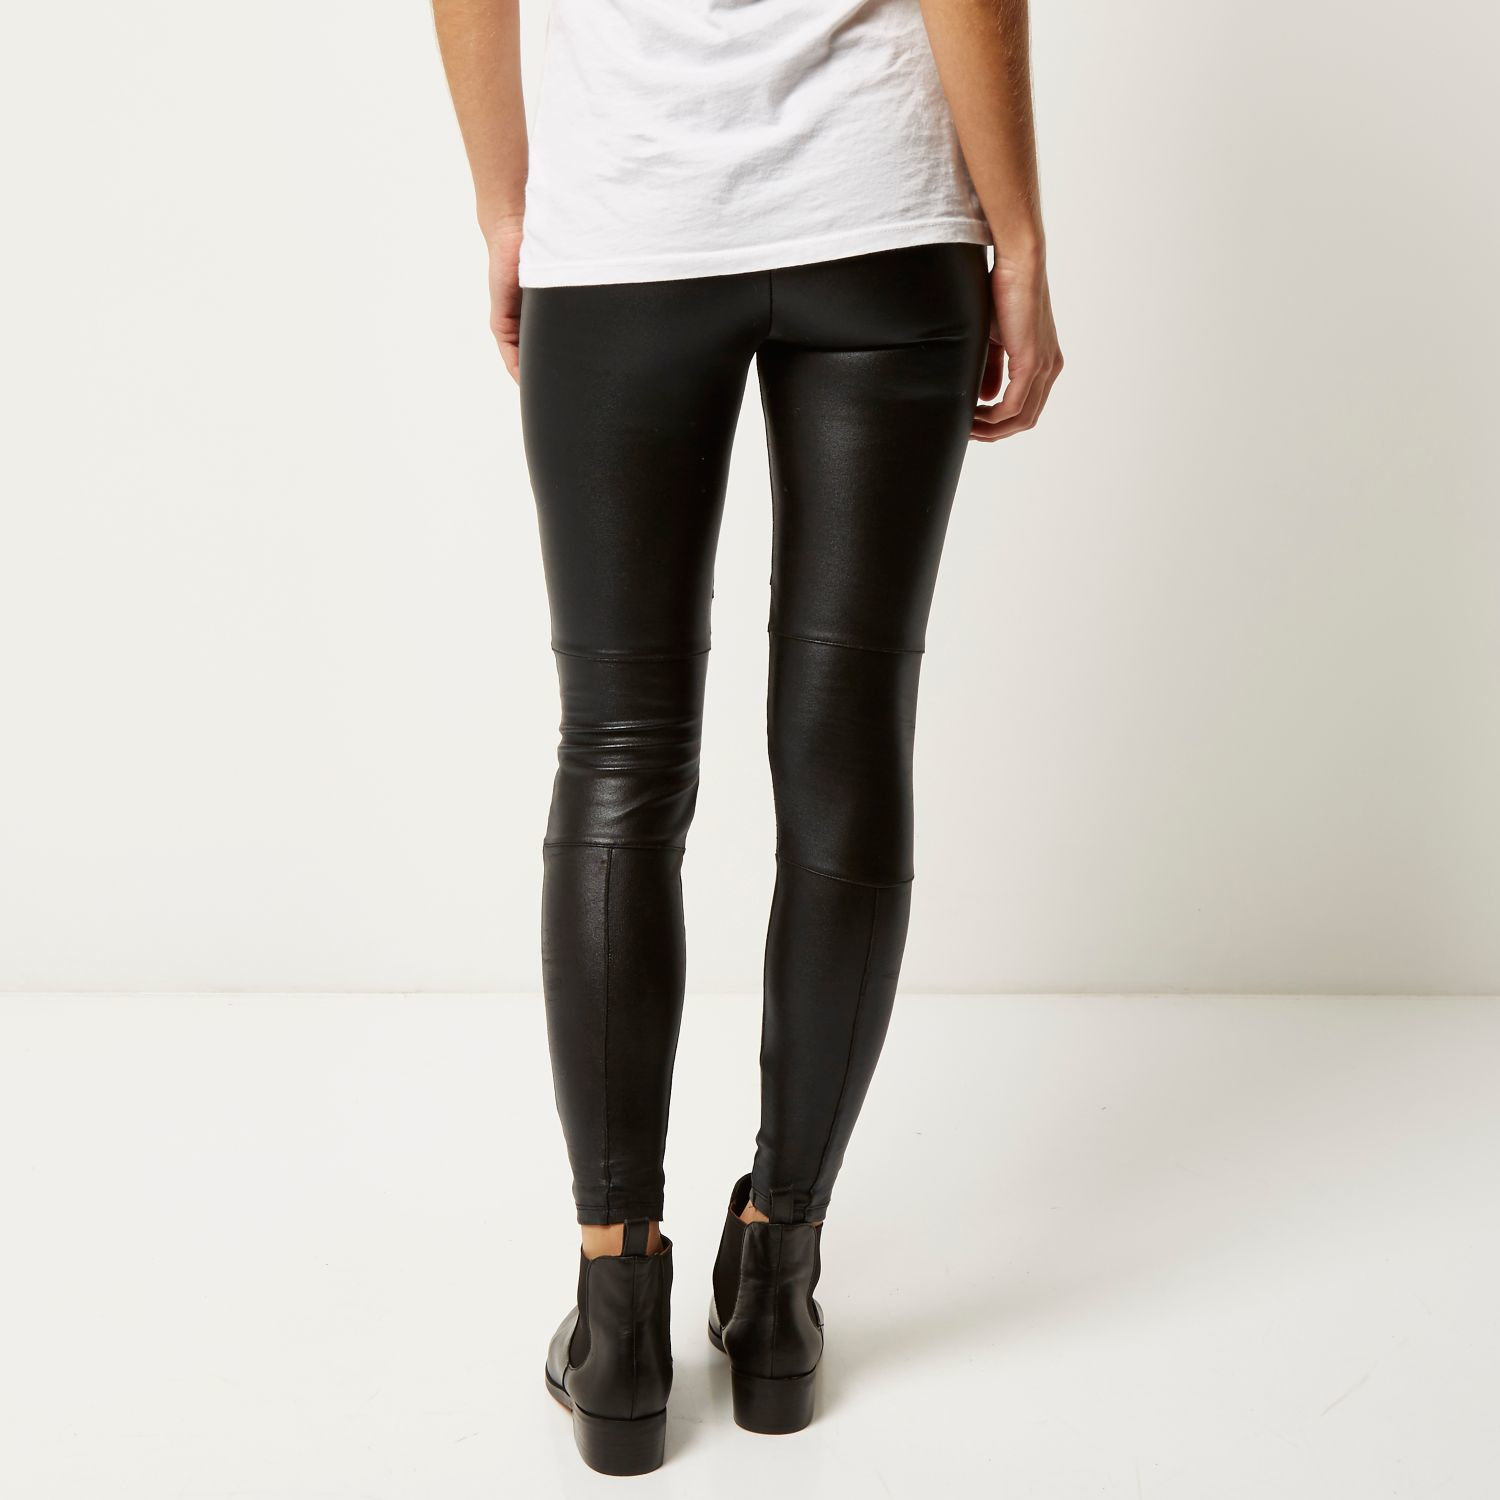 Checkout this Cream matte coated ribbed biker leggings from River